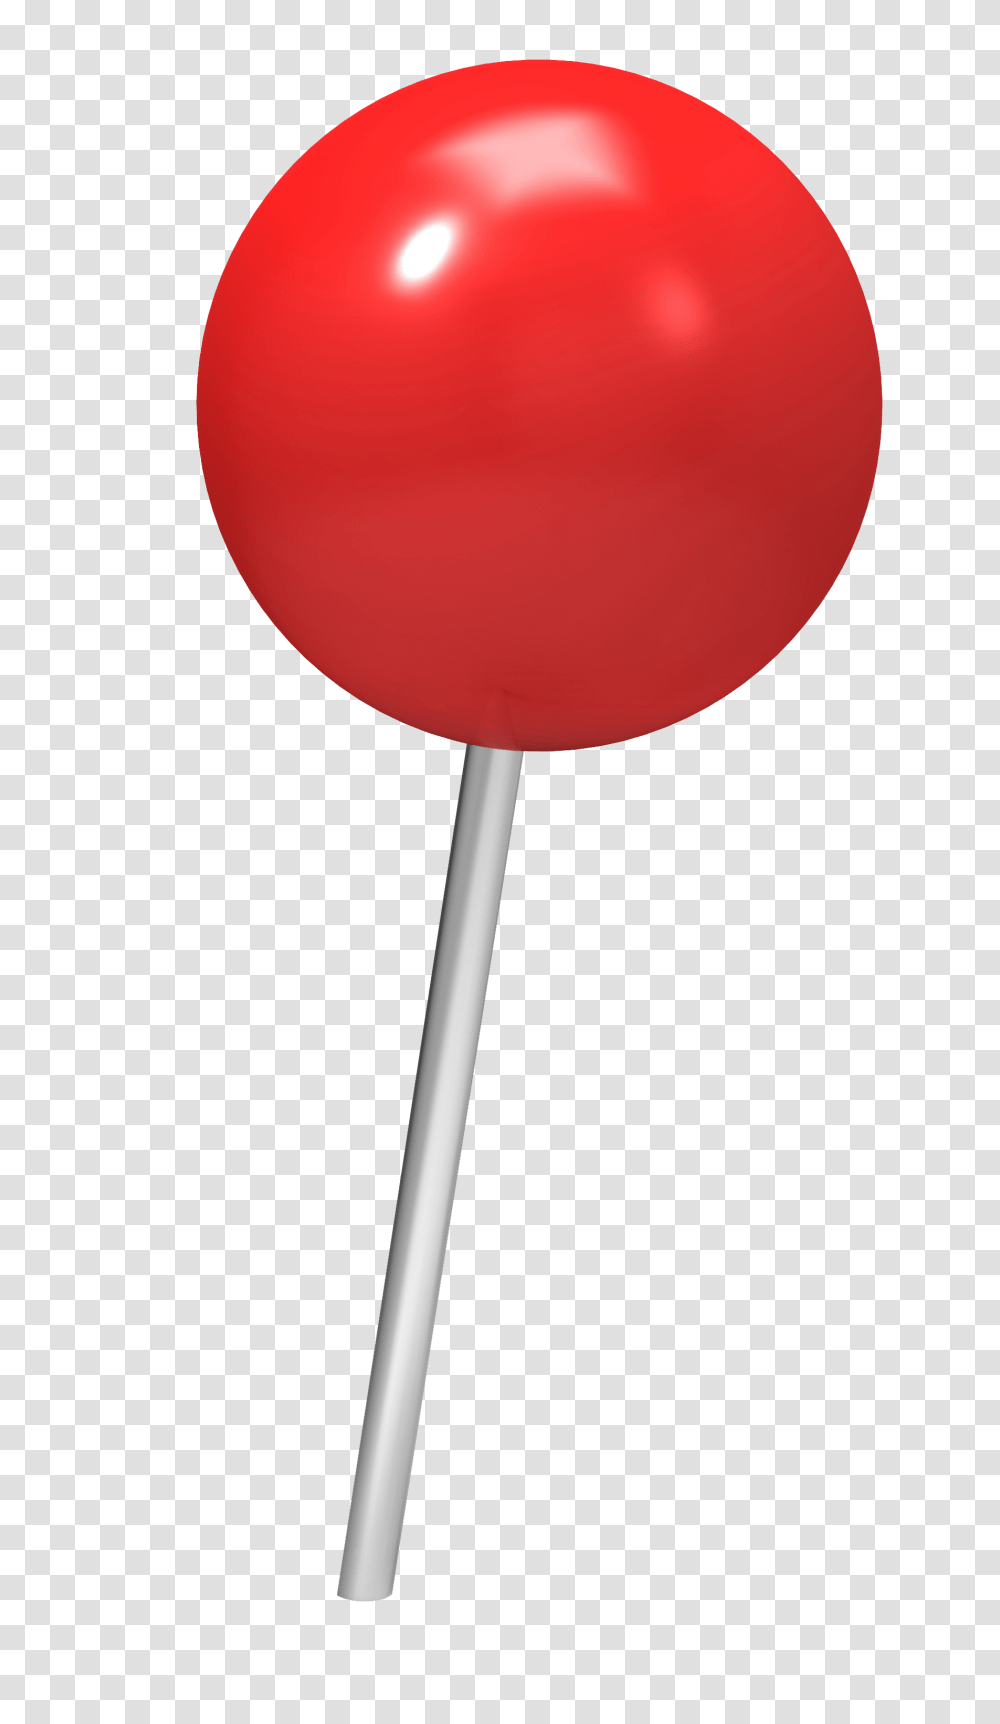 Pin, Lollipop, Candy, Food, Balloon Transparent Png